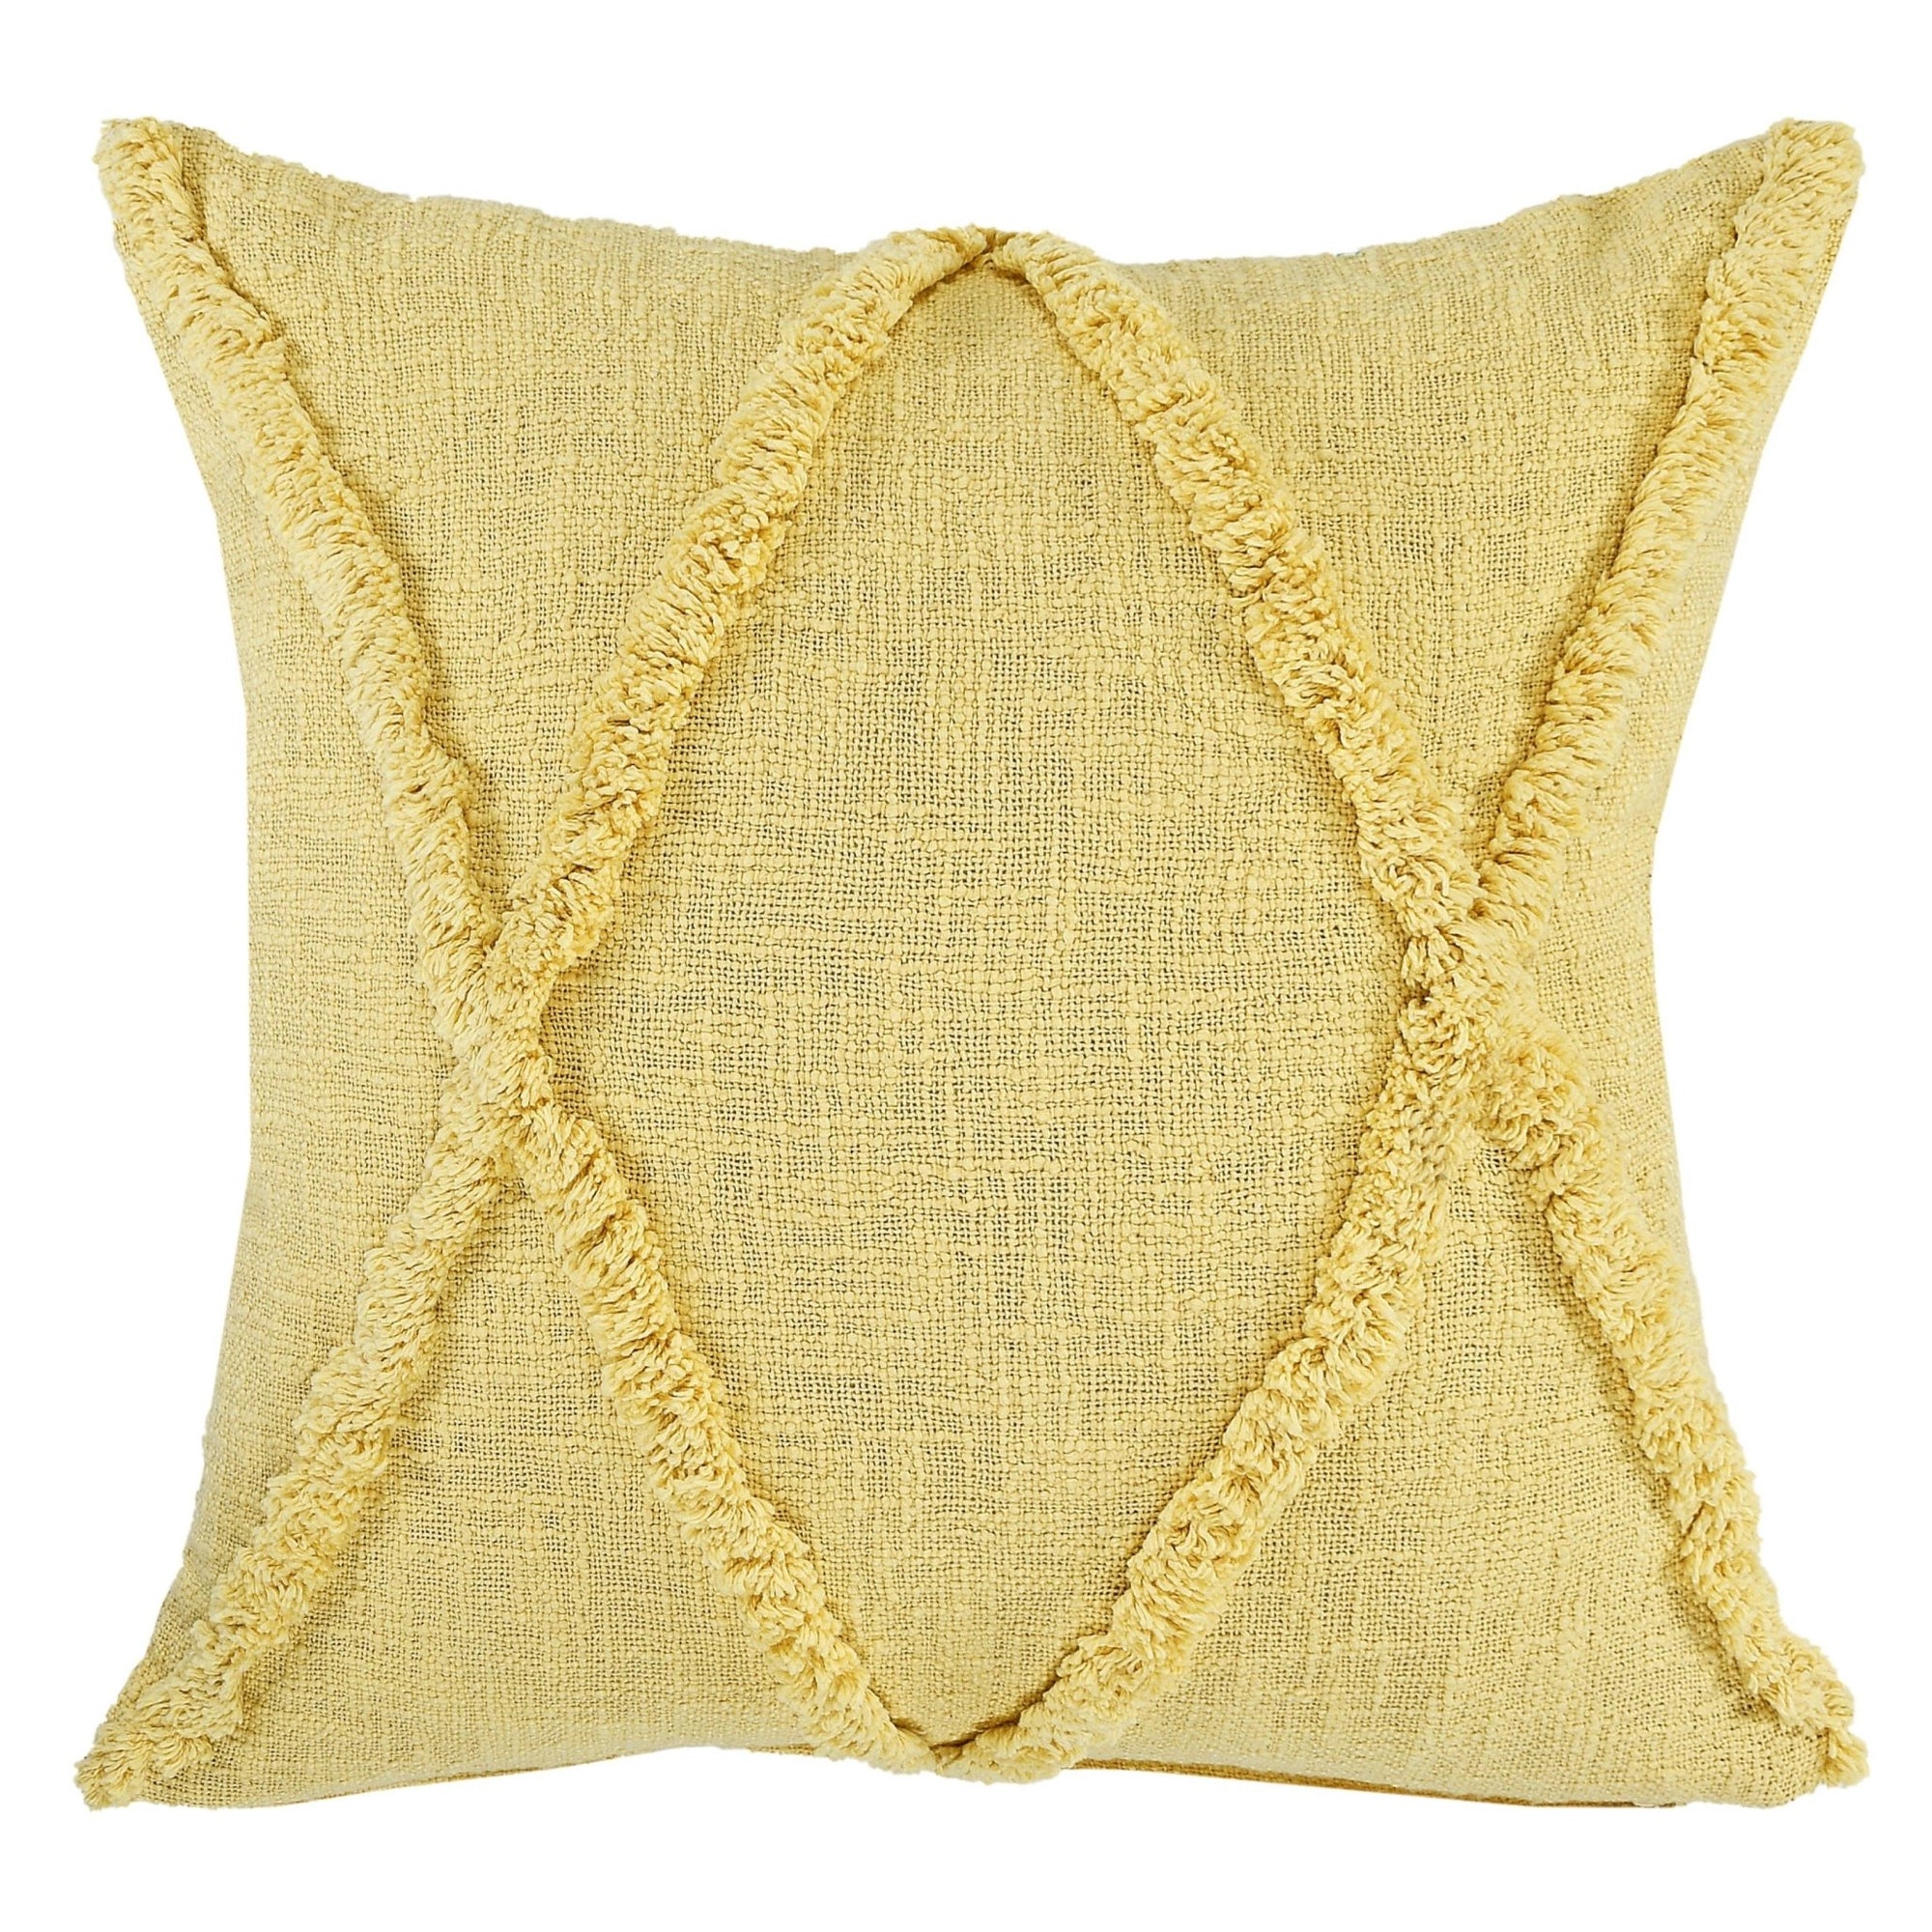 Reese Lr07732 Pastel Yellow Pillow - Rug & Home